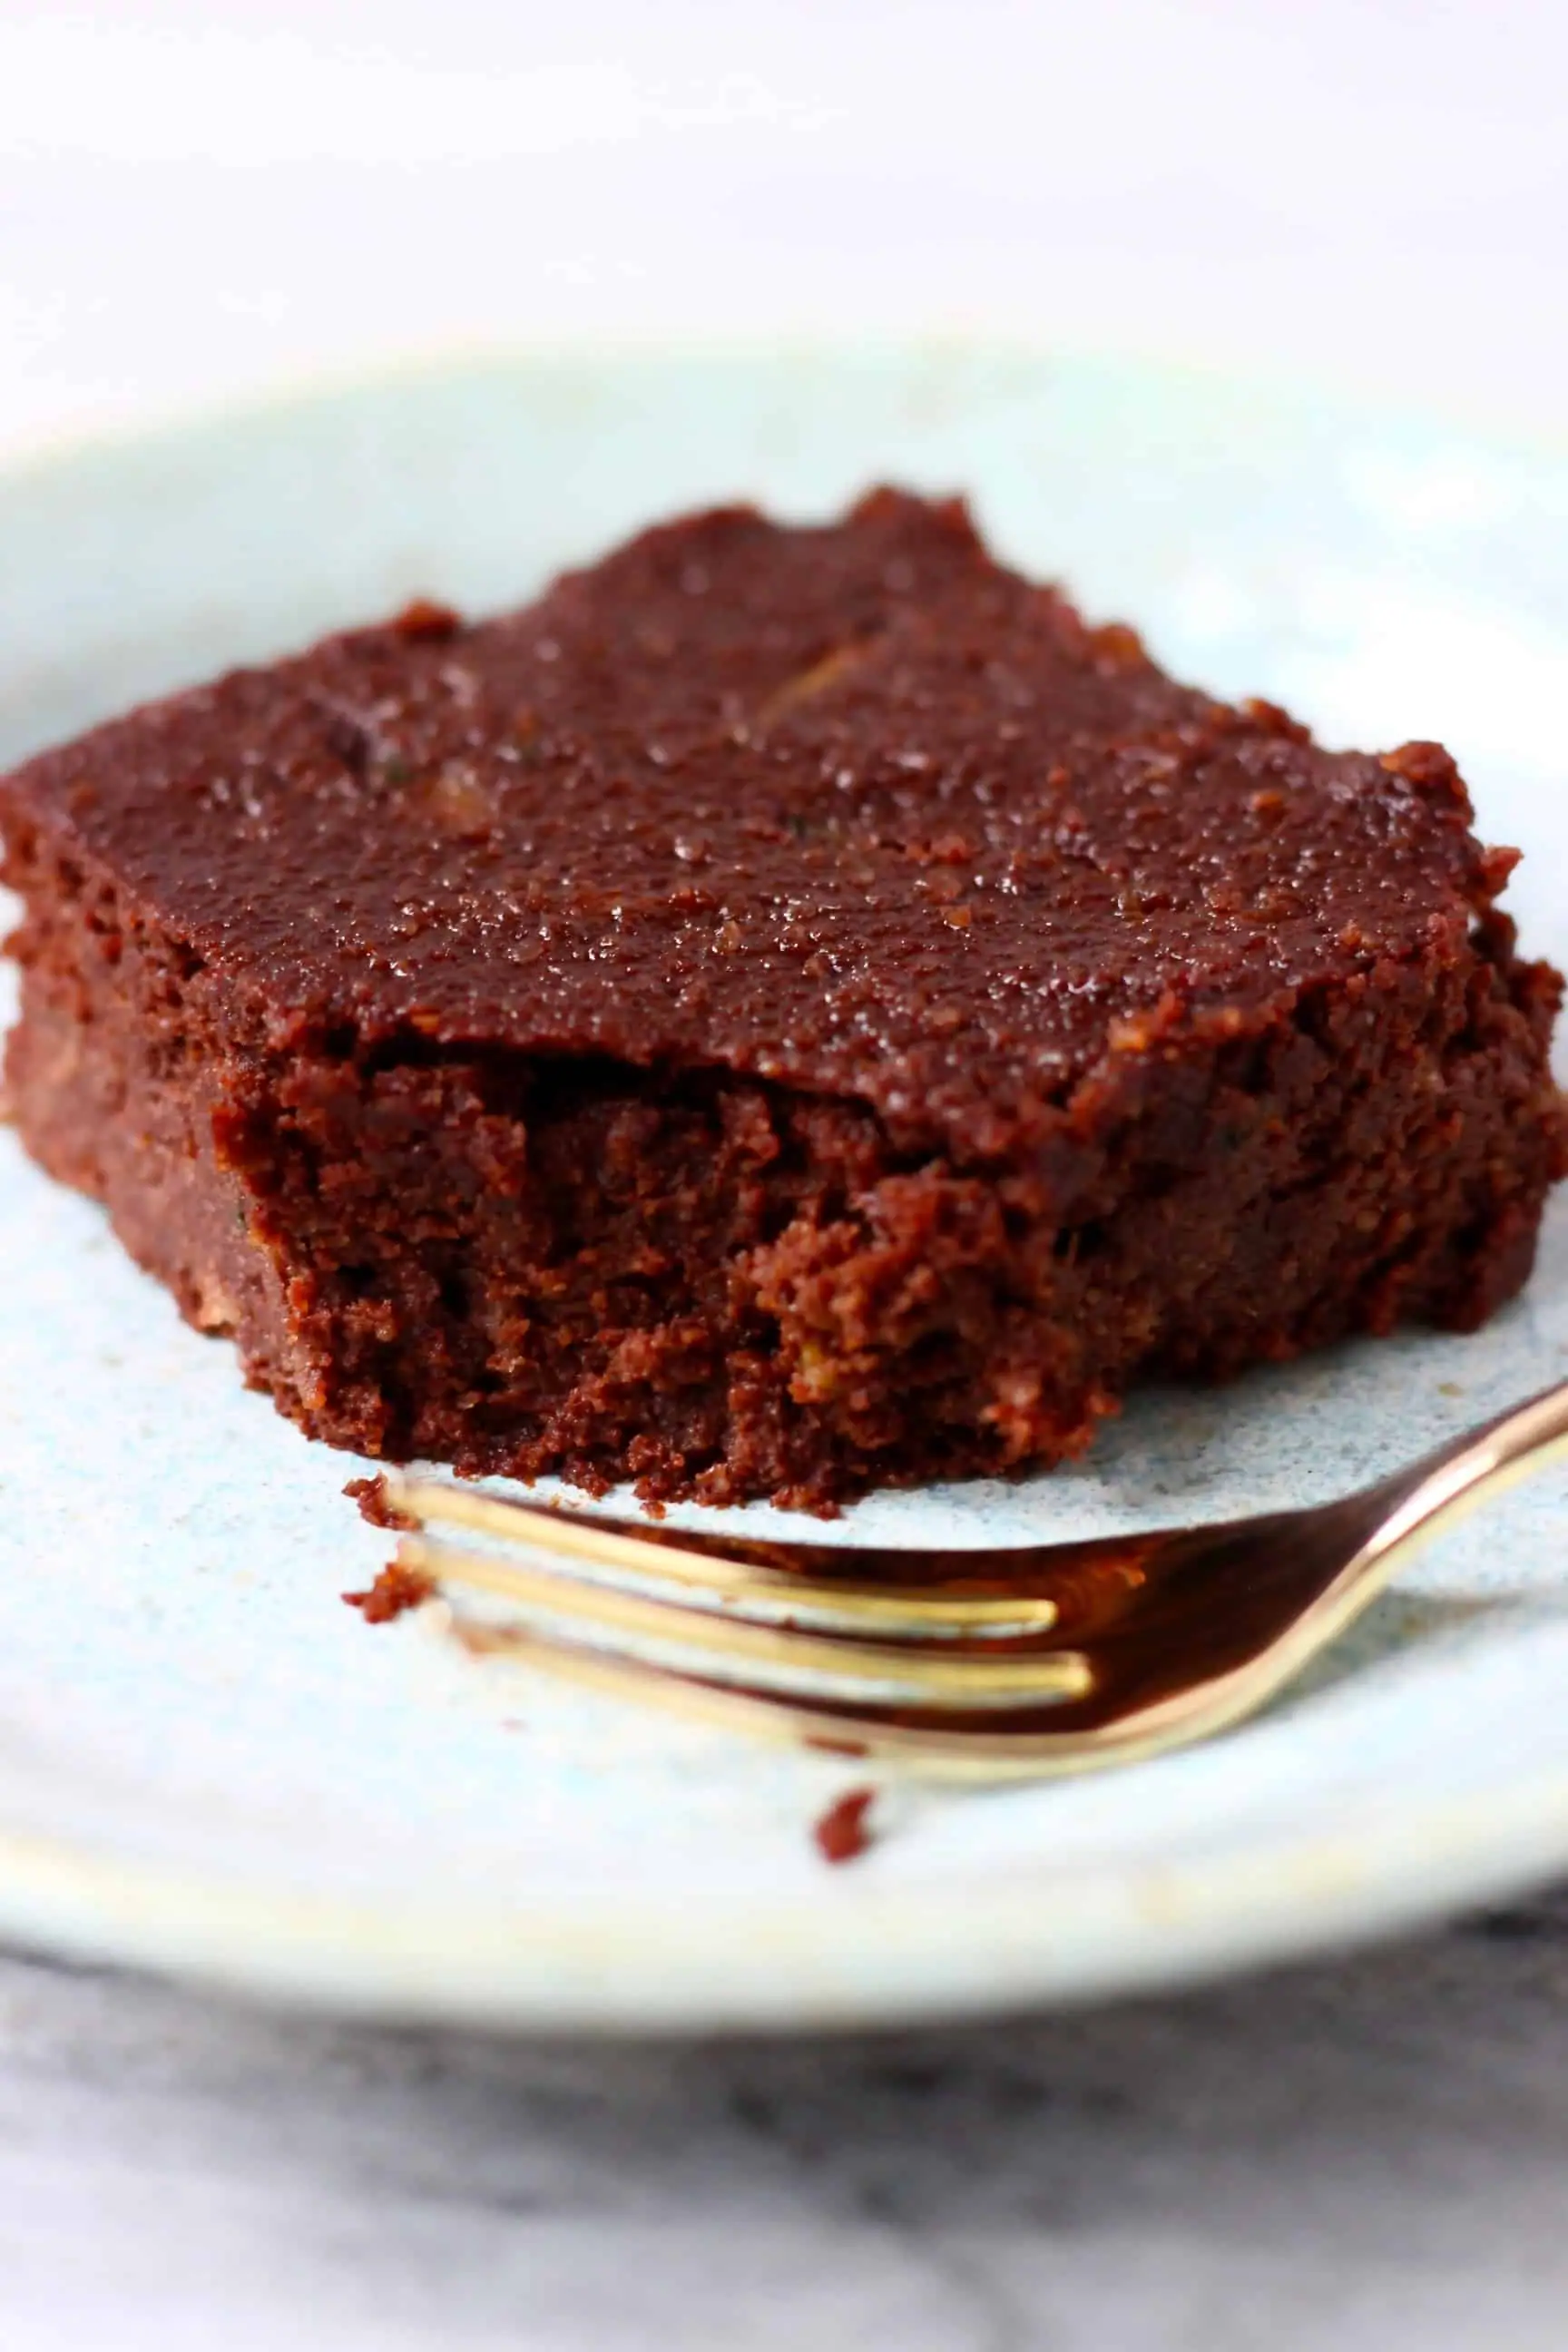 A square vegan zucchini brownie with a bite taken out of it on a blue plate with a gold fork